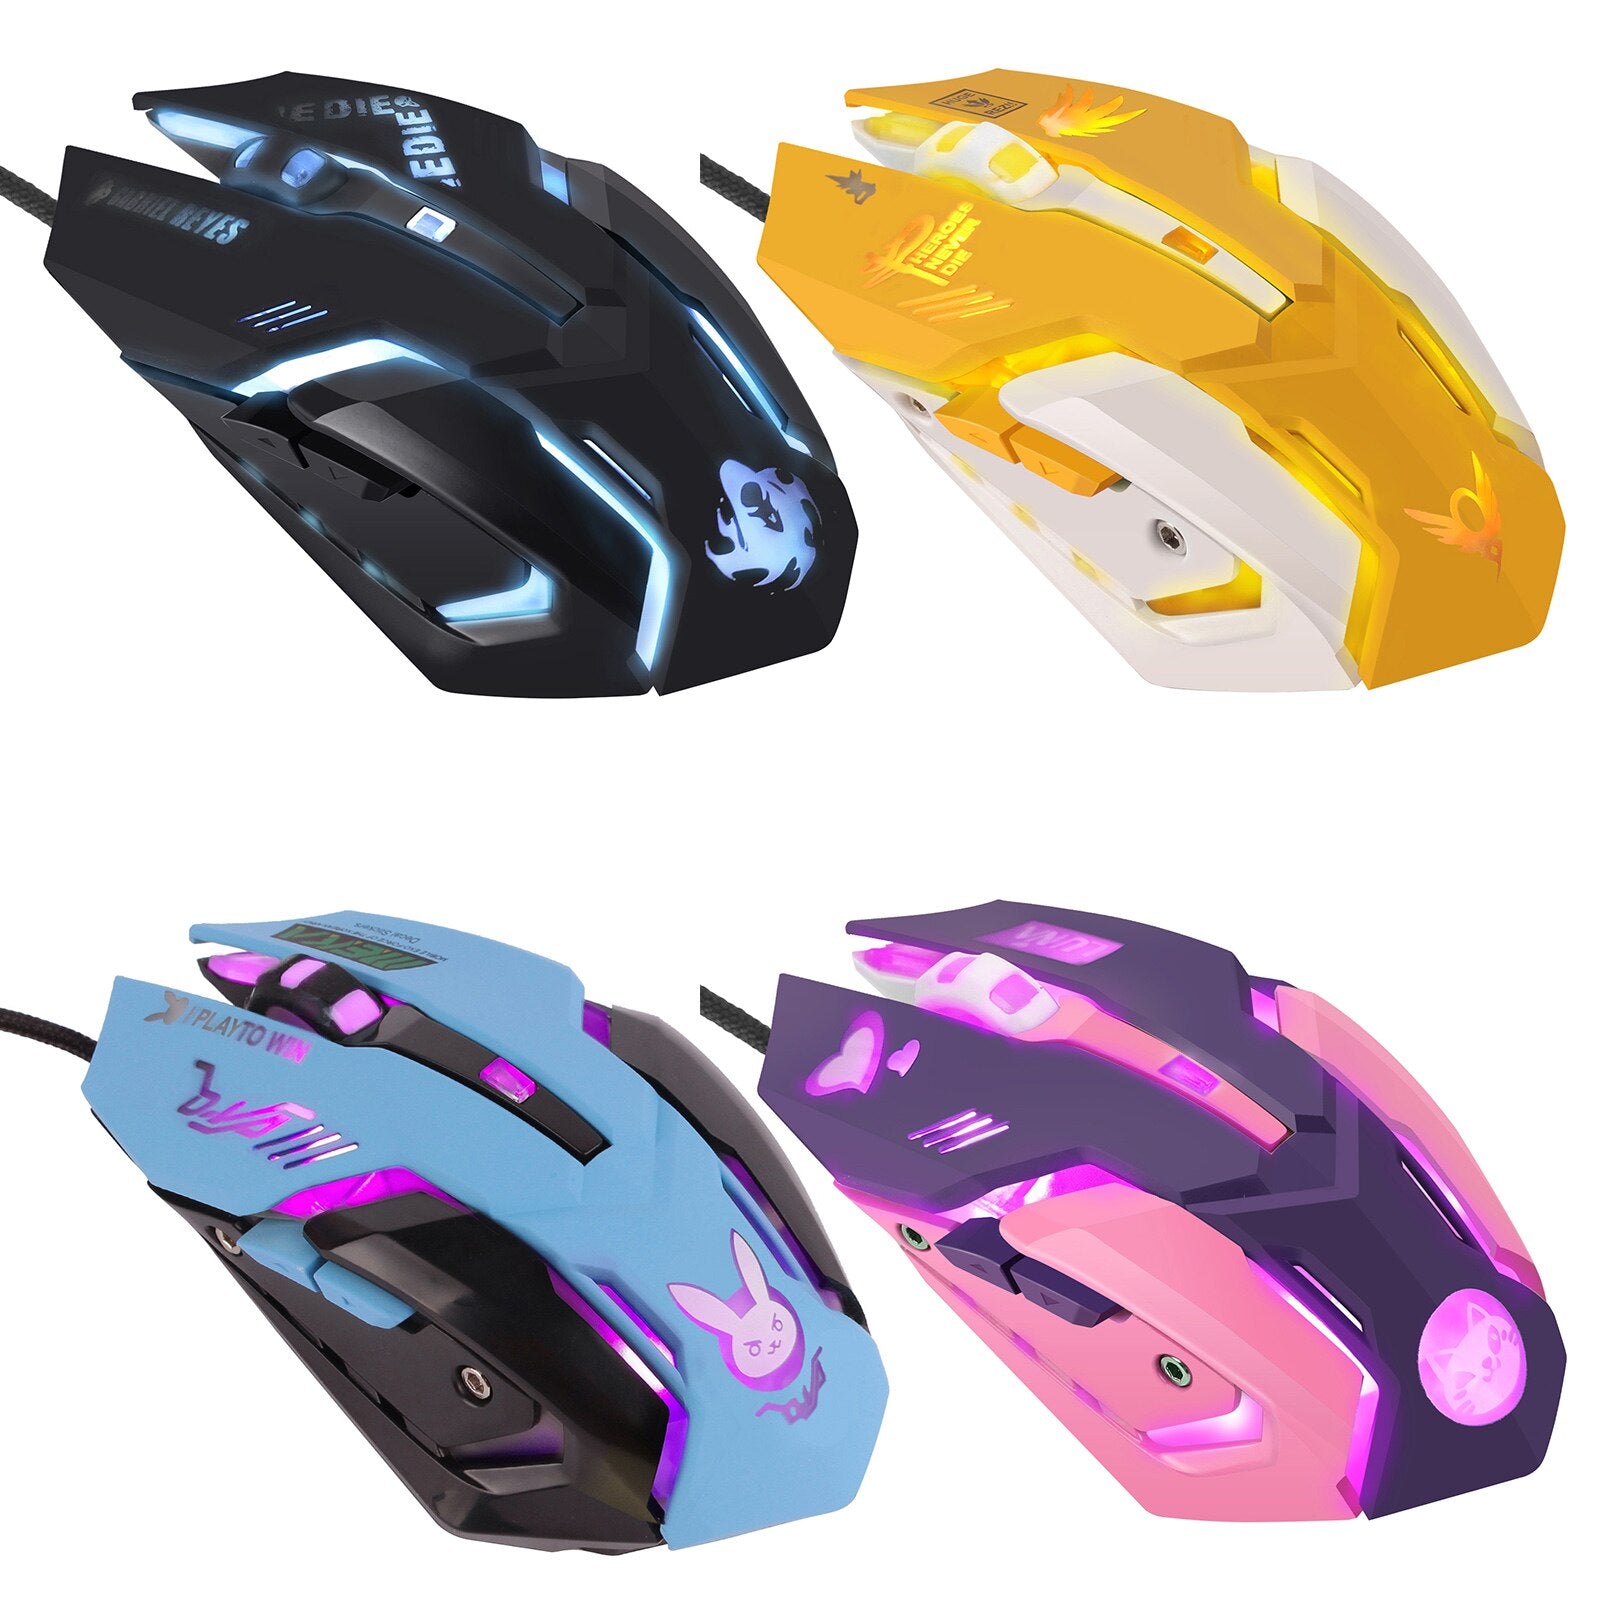 USB Wired 6 Buttons Ergonomic 2400dpi Optical Gaming Mouse